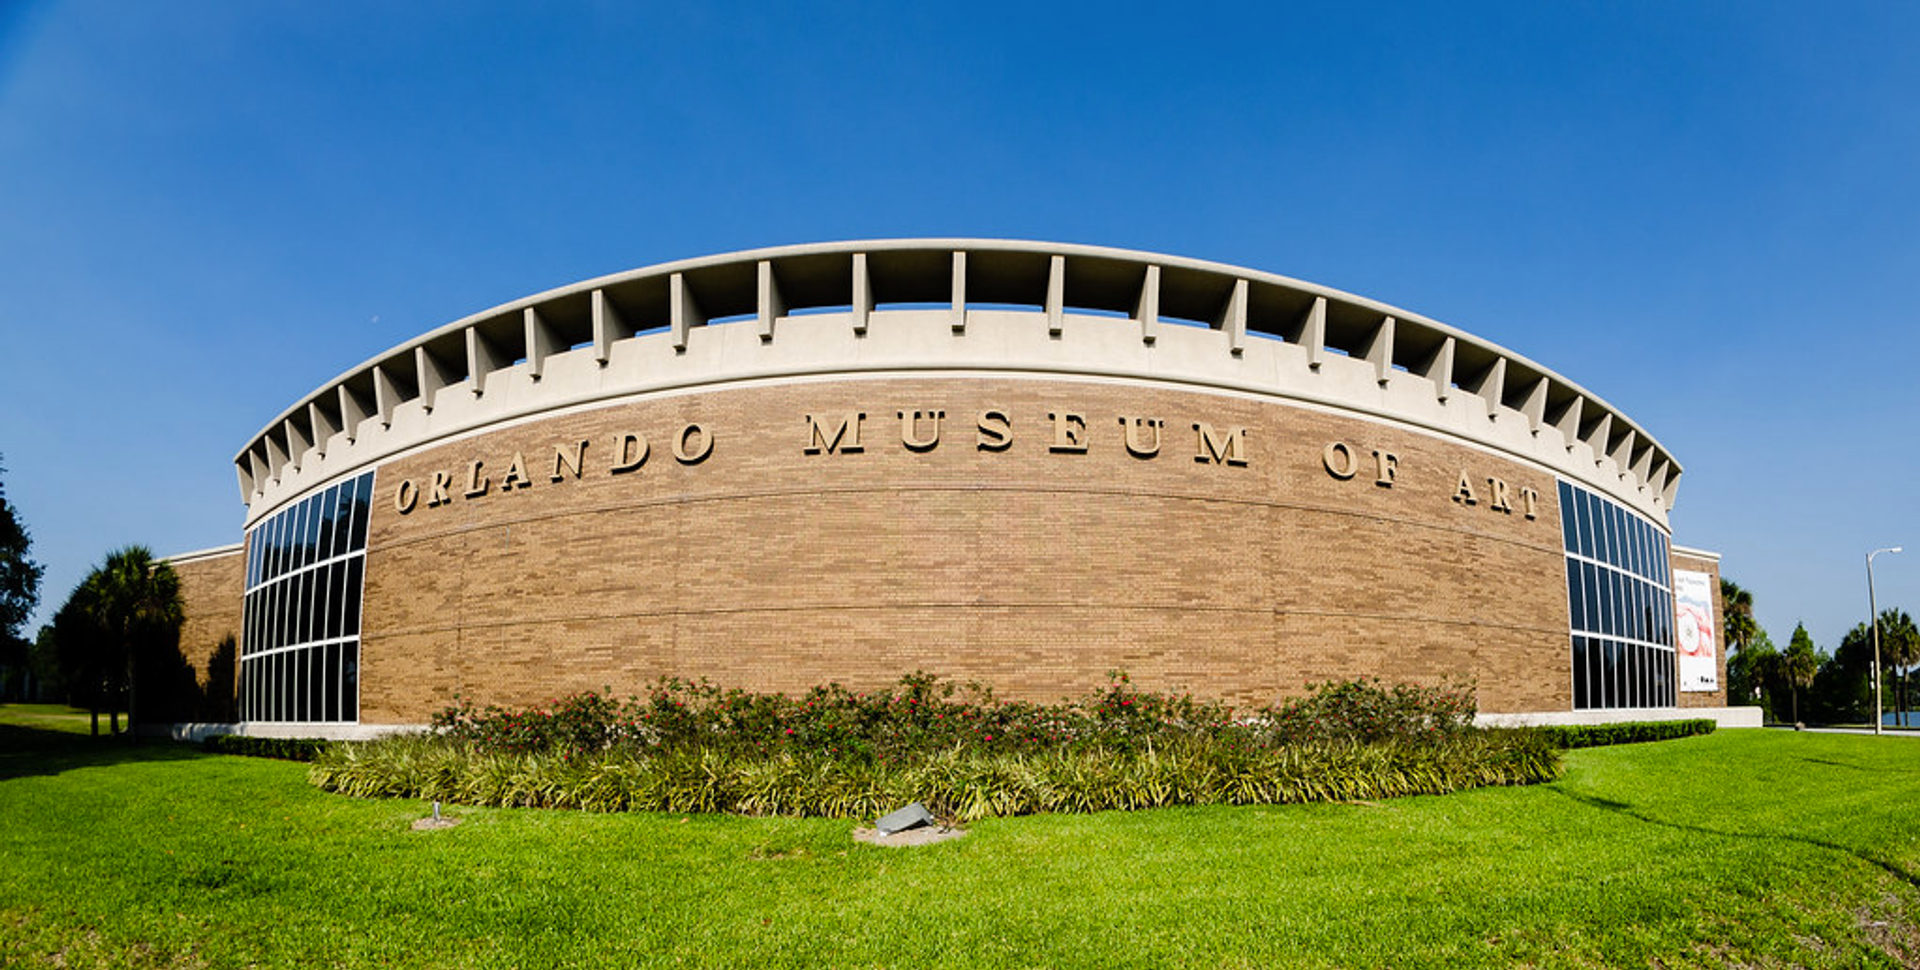 An external image of the Orlando Museum of Art. It shows a circular building with windows on either side, against a blue sky.